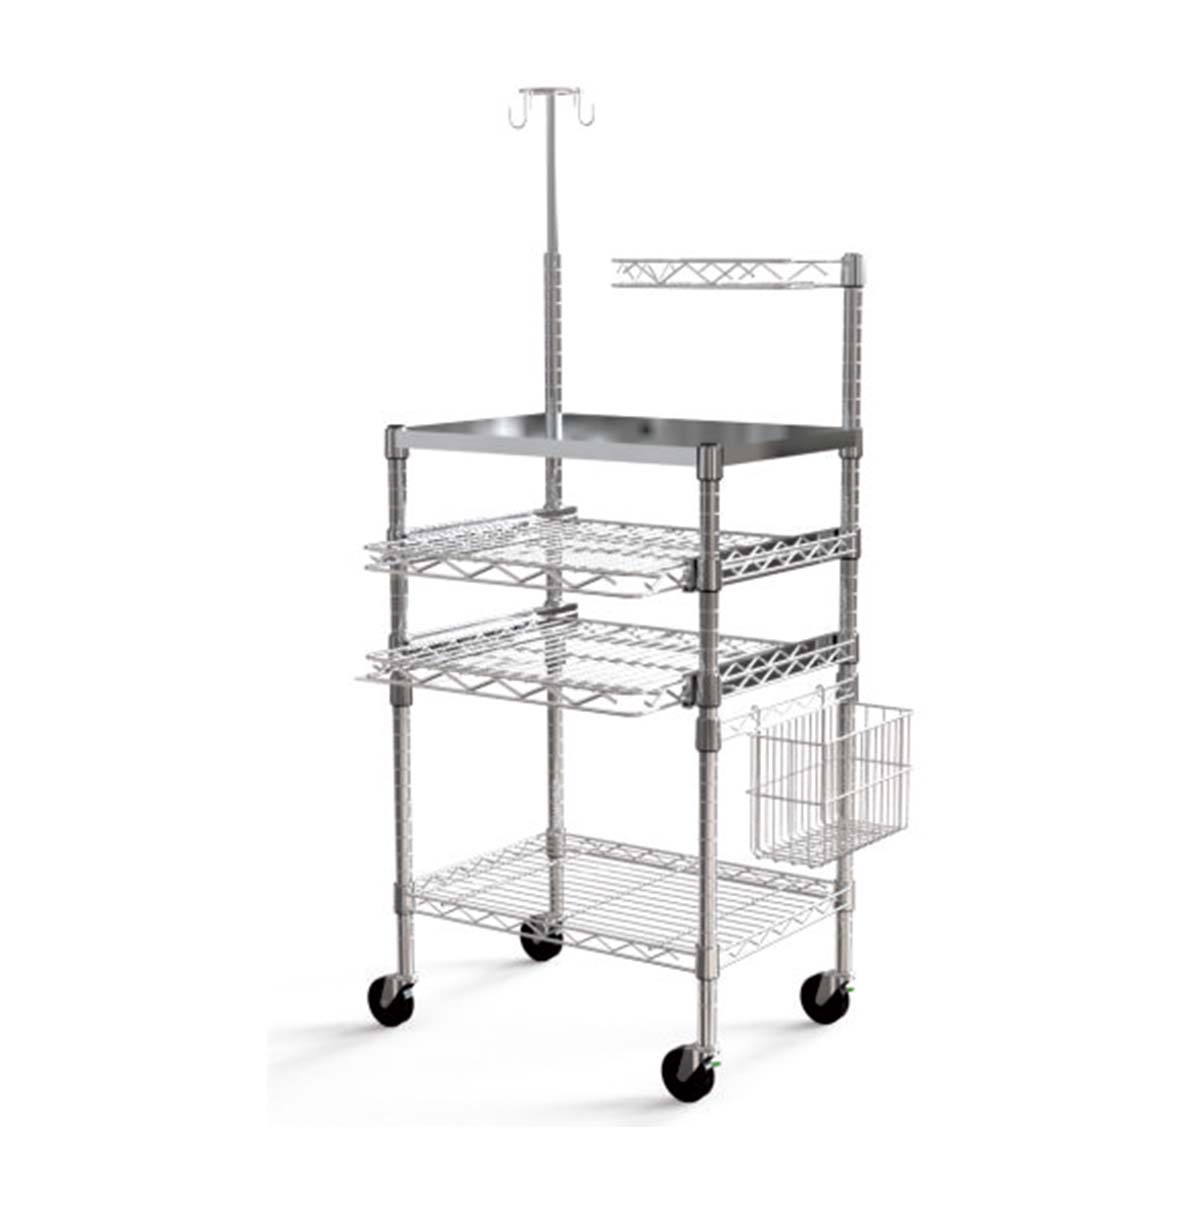 Chrome Wire Shelving Unit / Storage Racks for Medical Industry / Rolling Trolley Cart / 18 x 48 NSF 